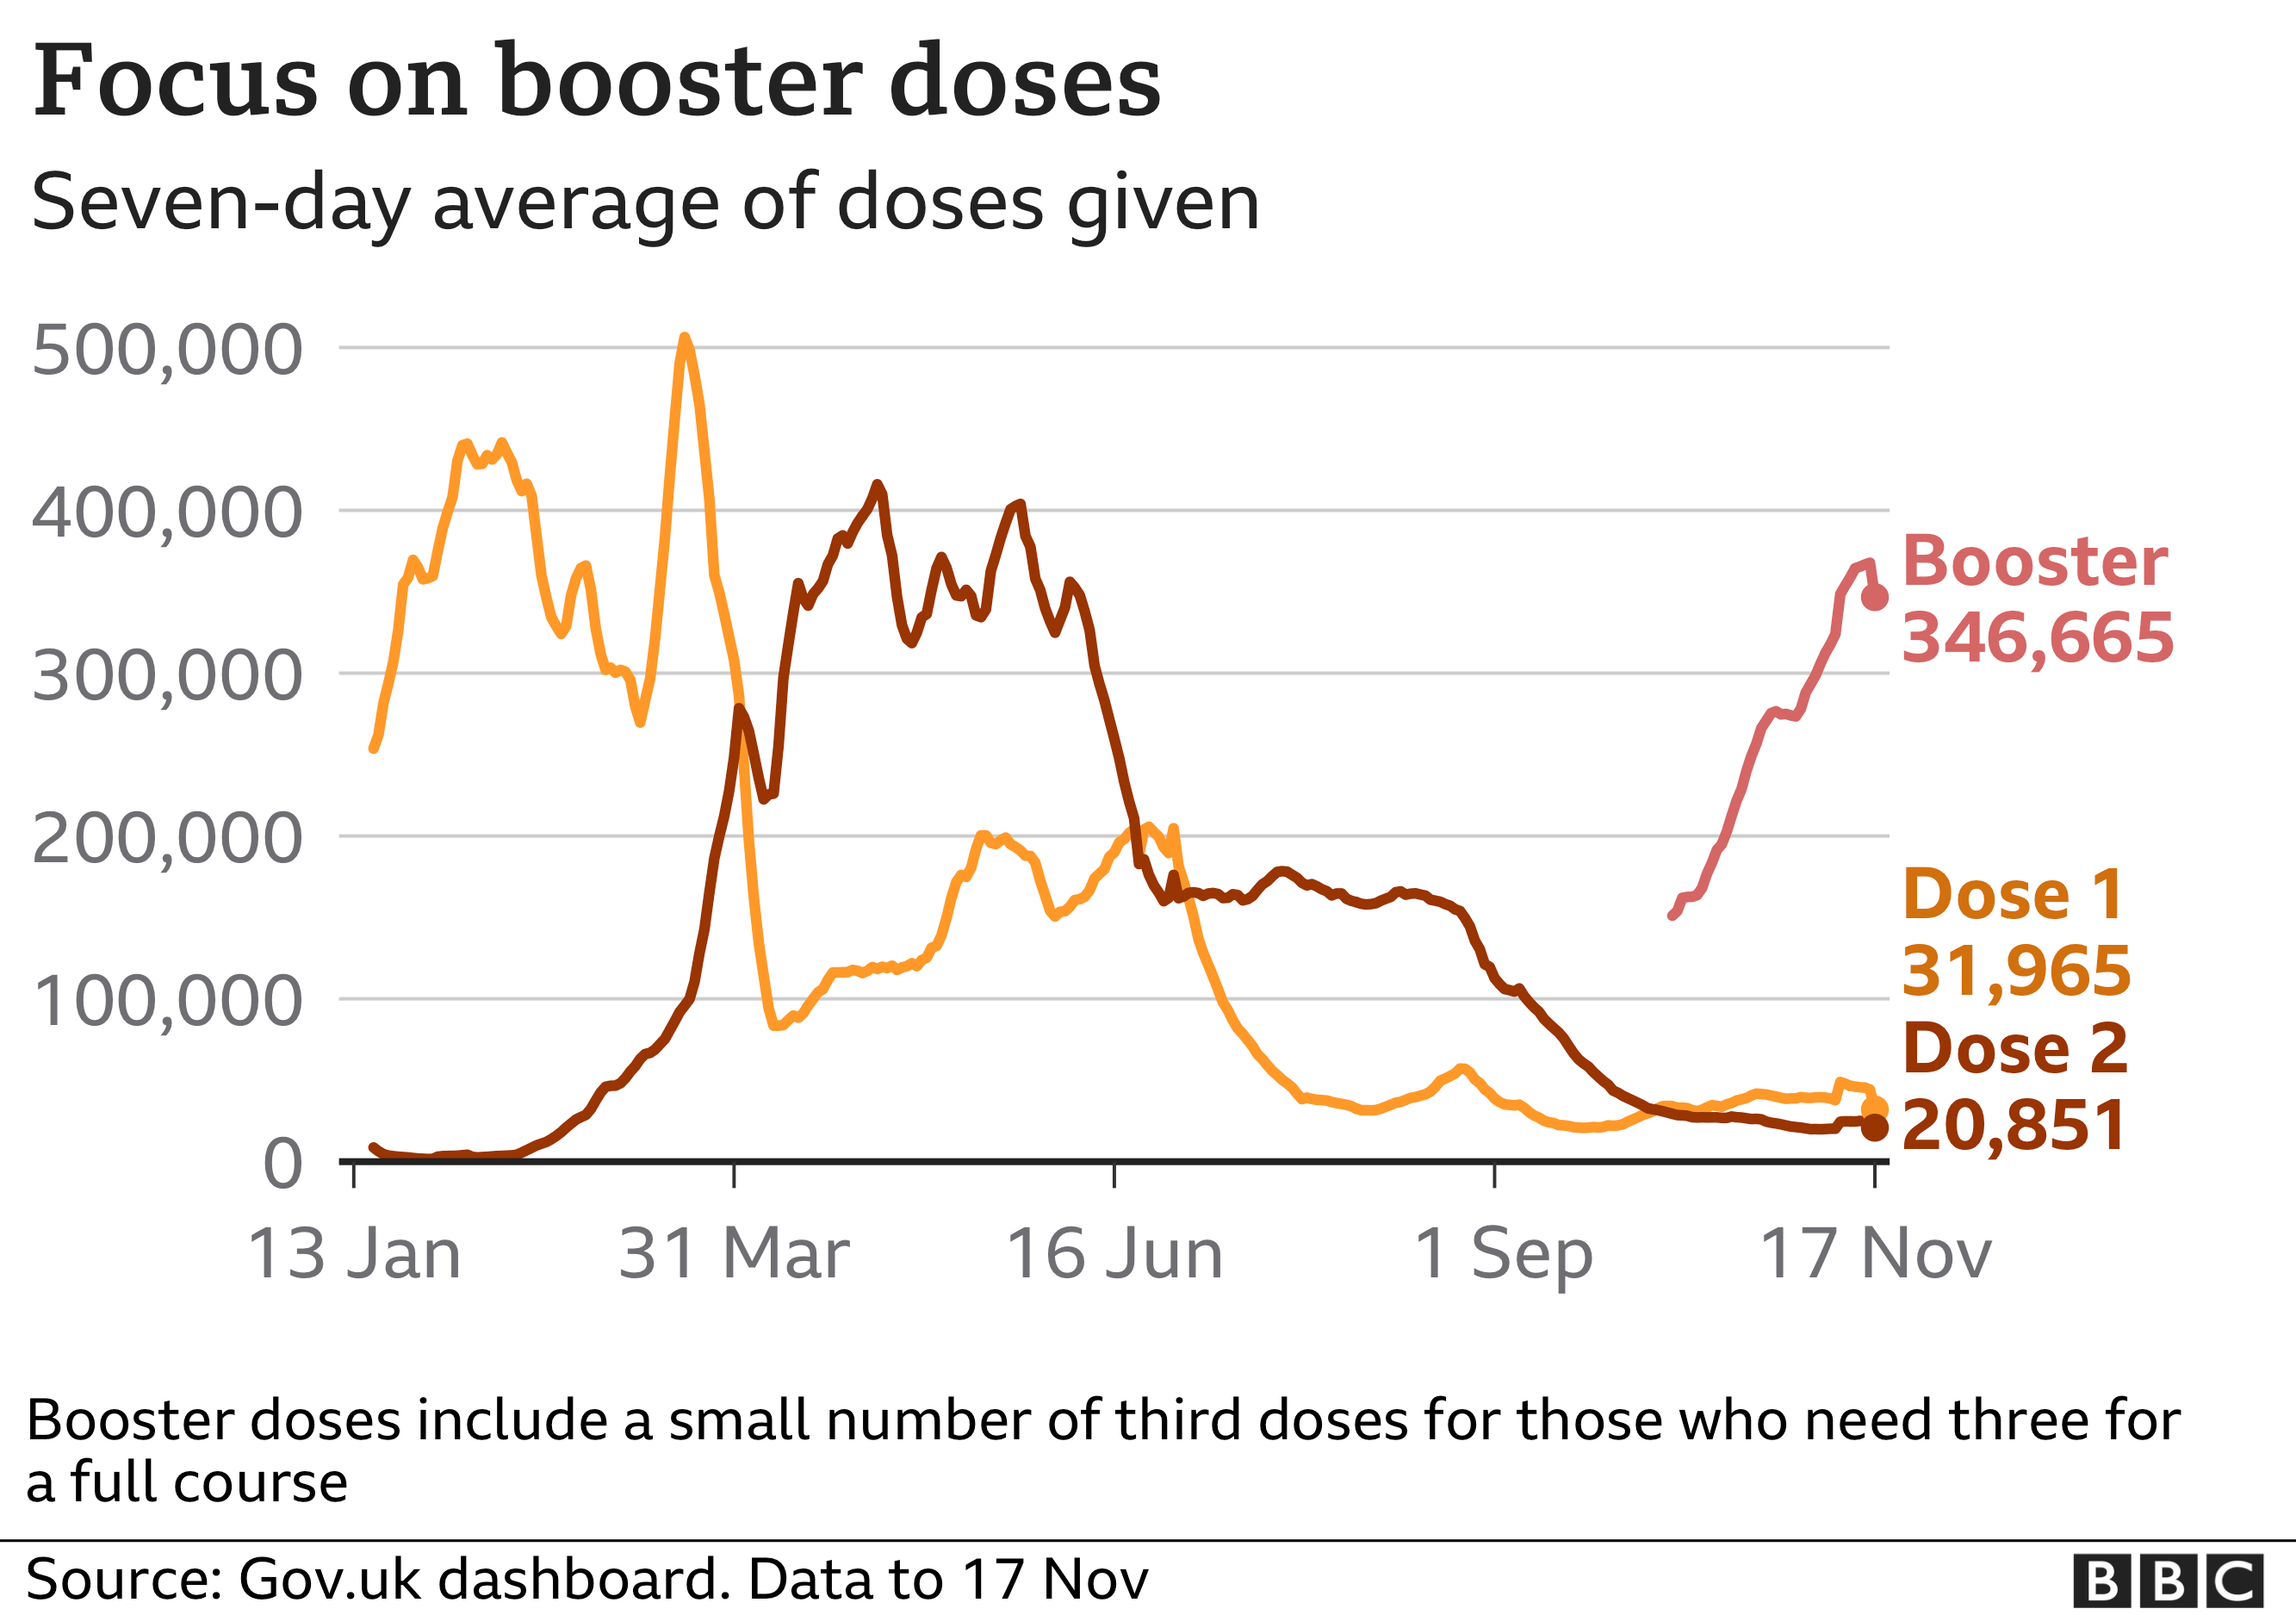 Chart showing that while the number of first and second vaccine doses being administered is now low in England, the number of daily booster doses has been rising